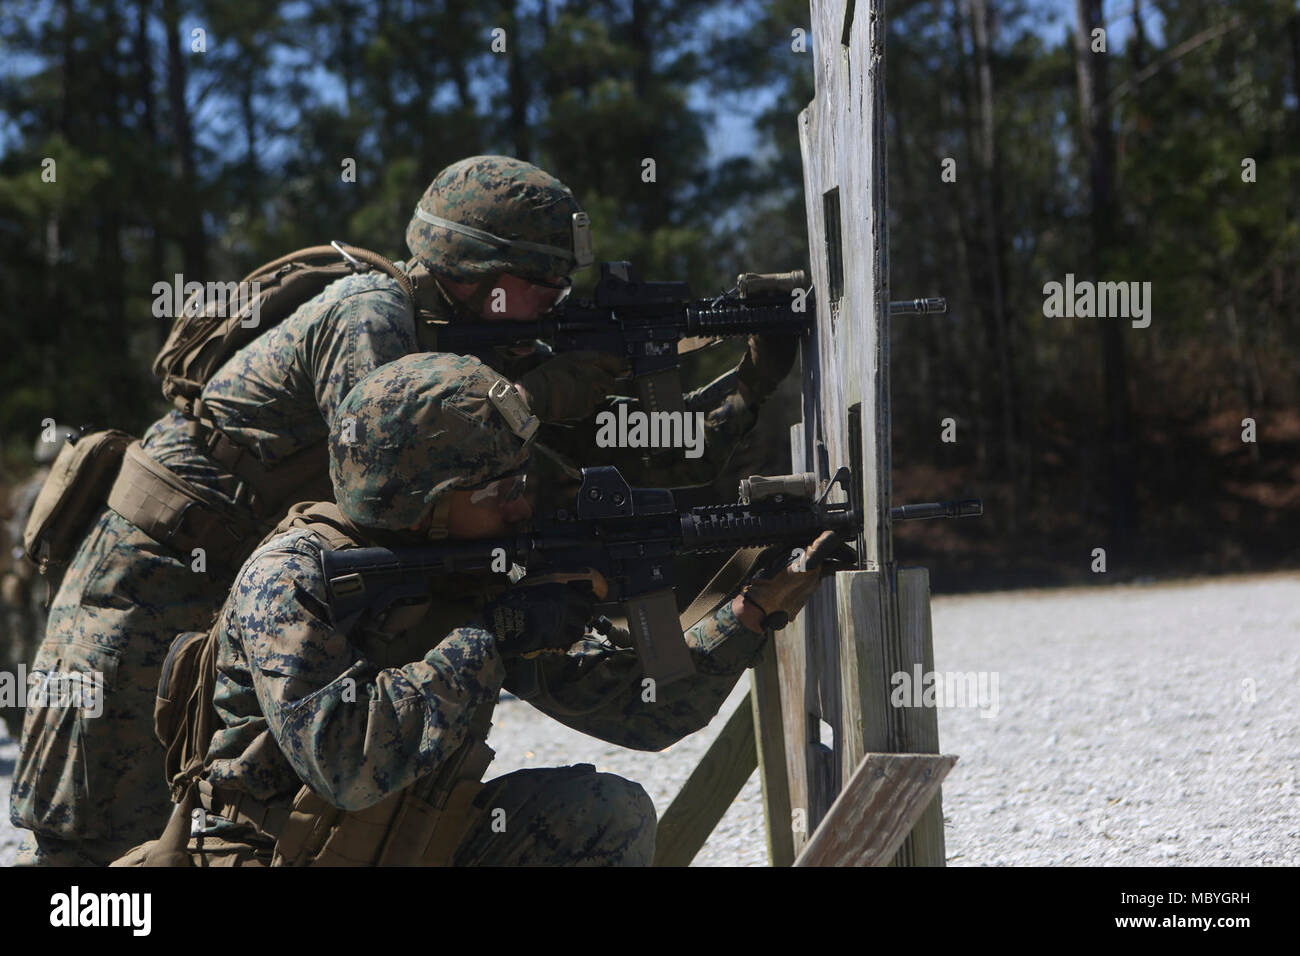 U.S. Marines with 2nd Marine Division, rehearse static firing techniques during a range as part of a close quarter’s tactics enabler’s course at Camp Lejeune, N.C., March 23, 2018. The course provided Marines the opportunity to improve fire and movement tactics as a security platoon element. Marines participated in the training in preparation for their upcoming deployment with 22ndnMarine Expeditionary Unit. Stock Photo